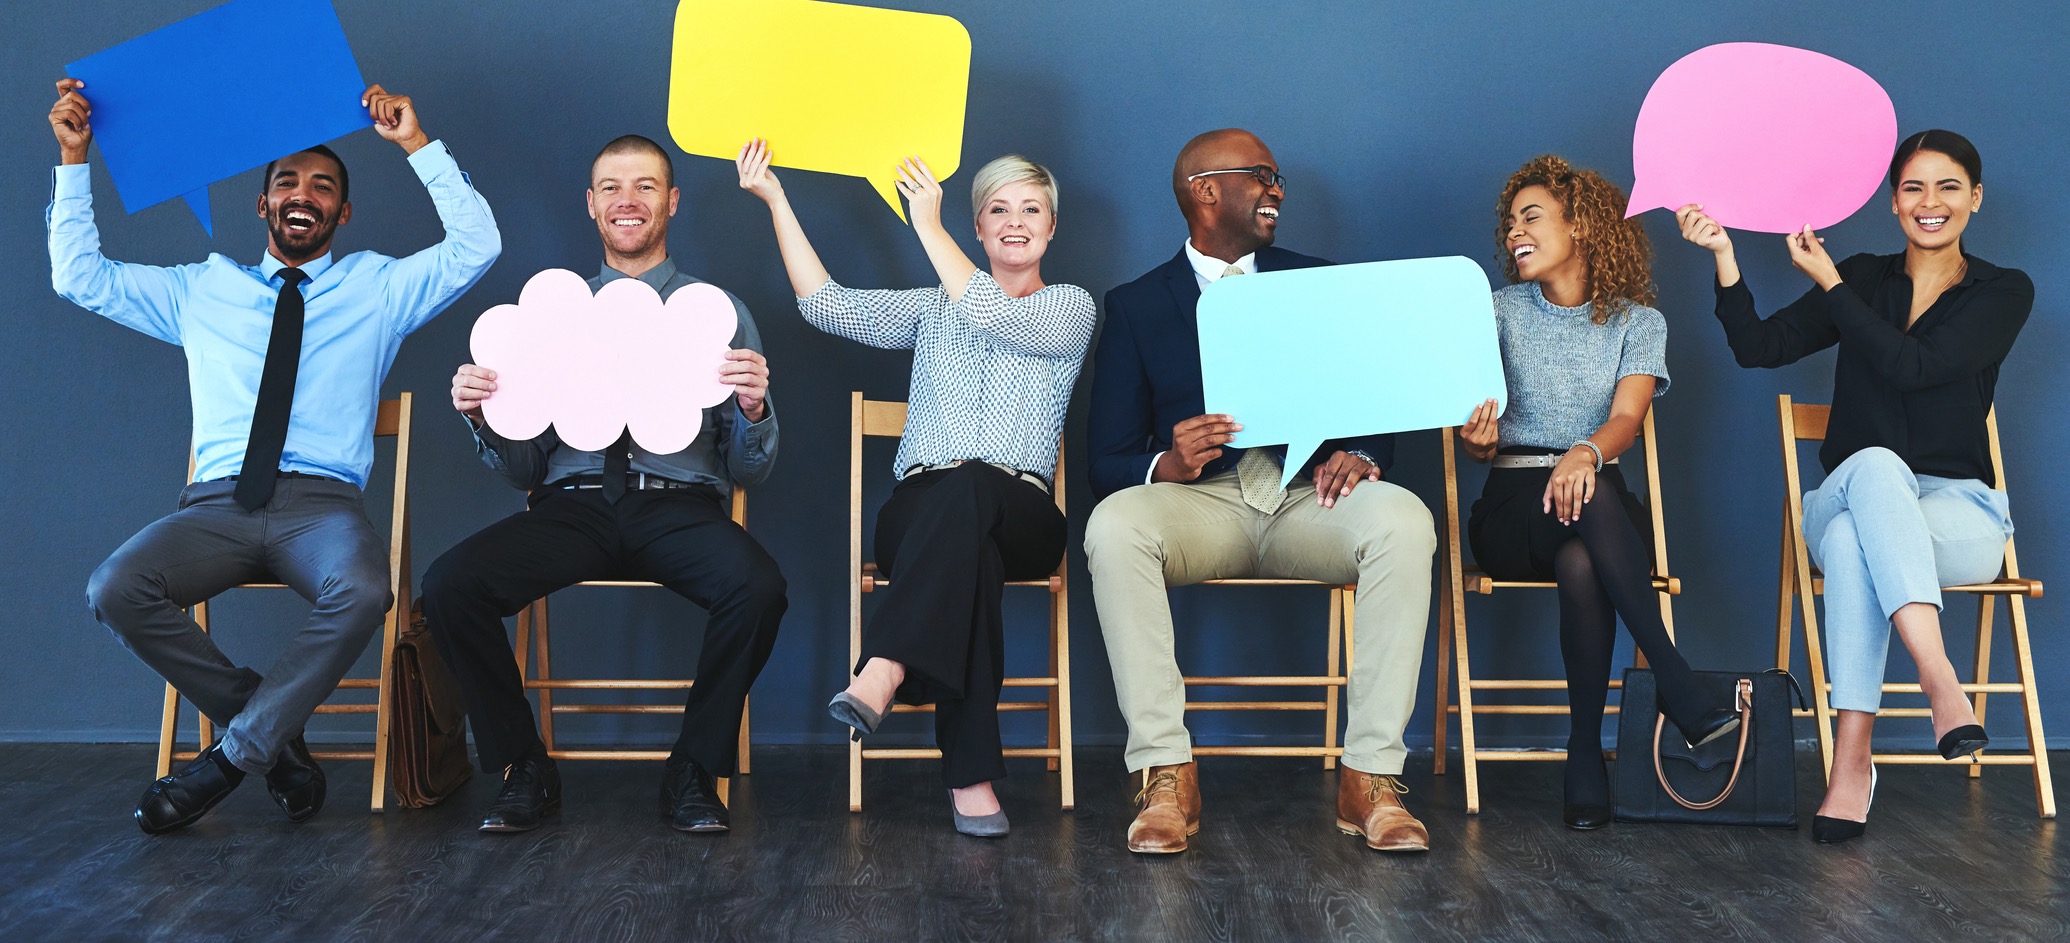 A group of people sat in a row holding up speech bubbles.